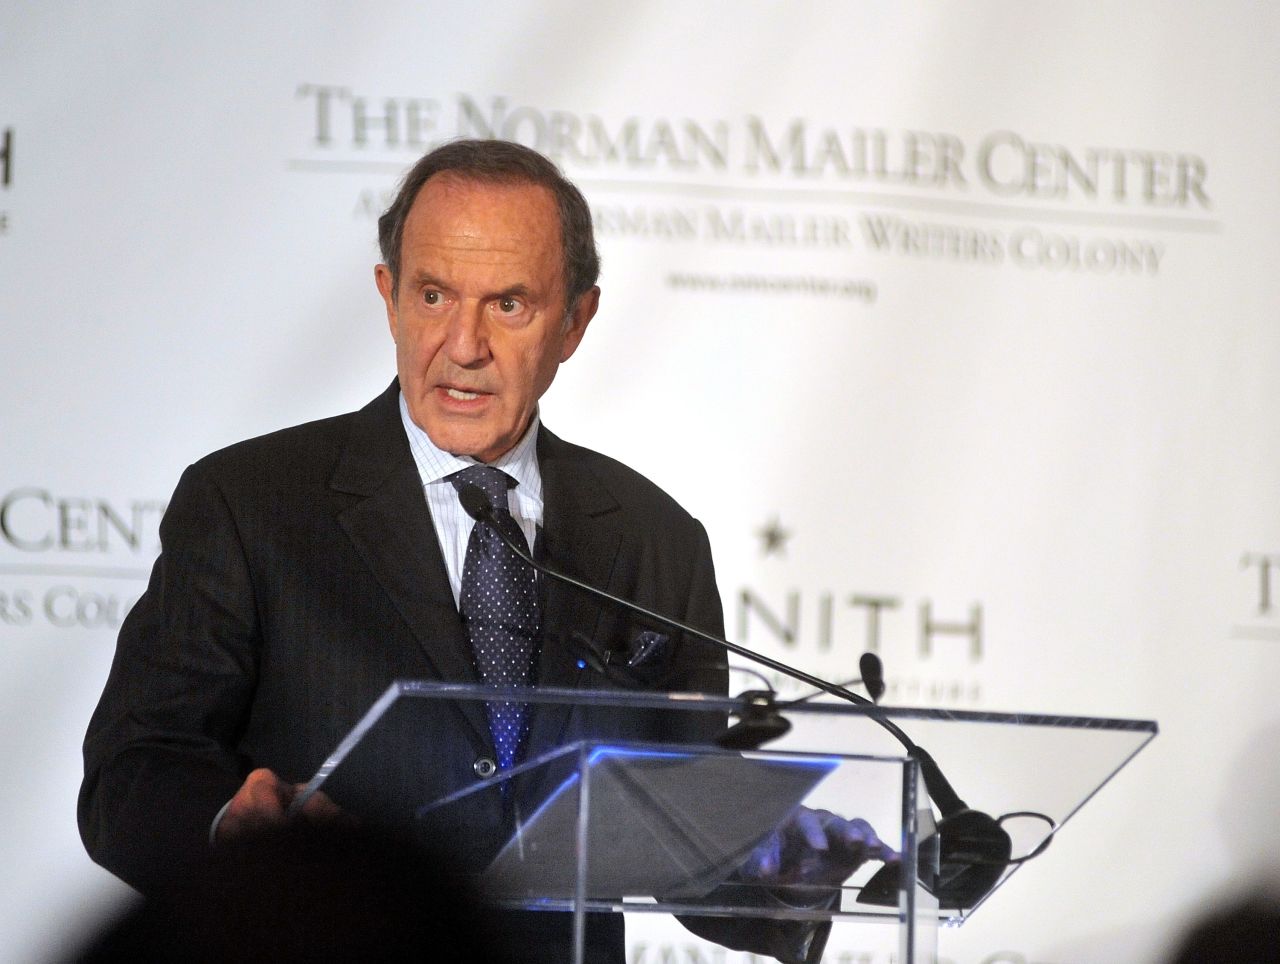 Mort Zuckerman was among the investors to anticipate and profit from the 2008 global economic crash - to the tune of billions of dollars.